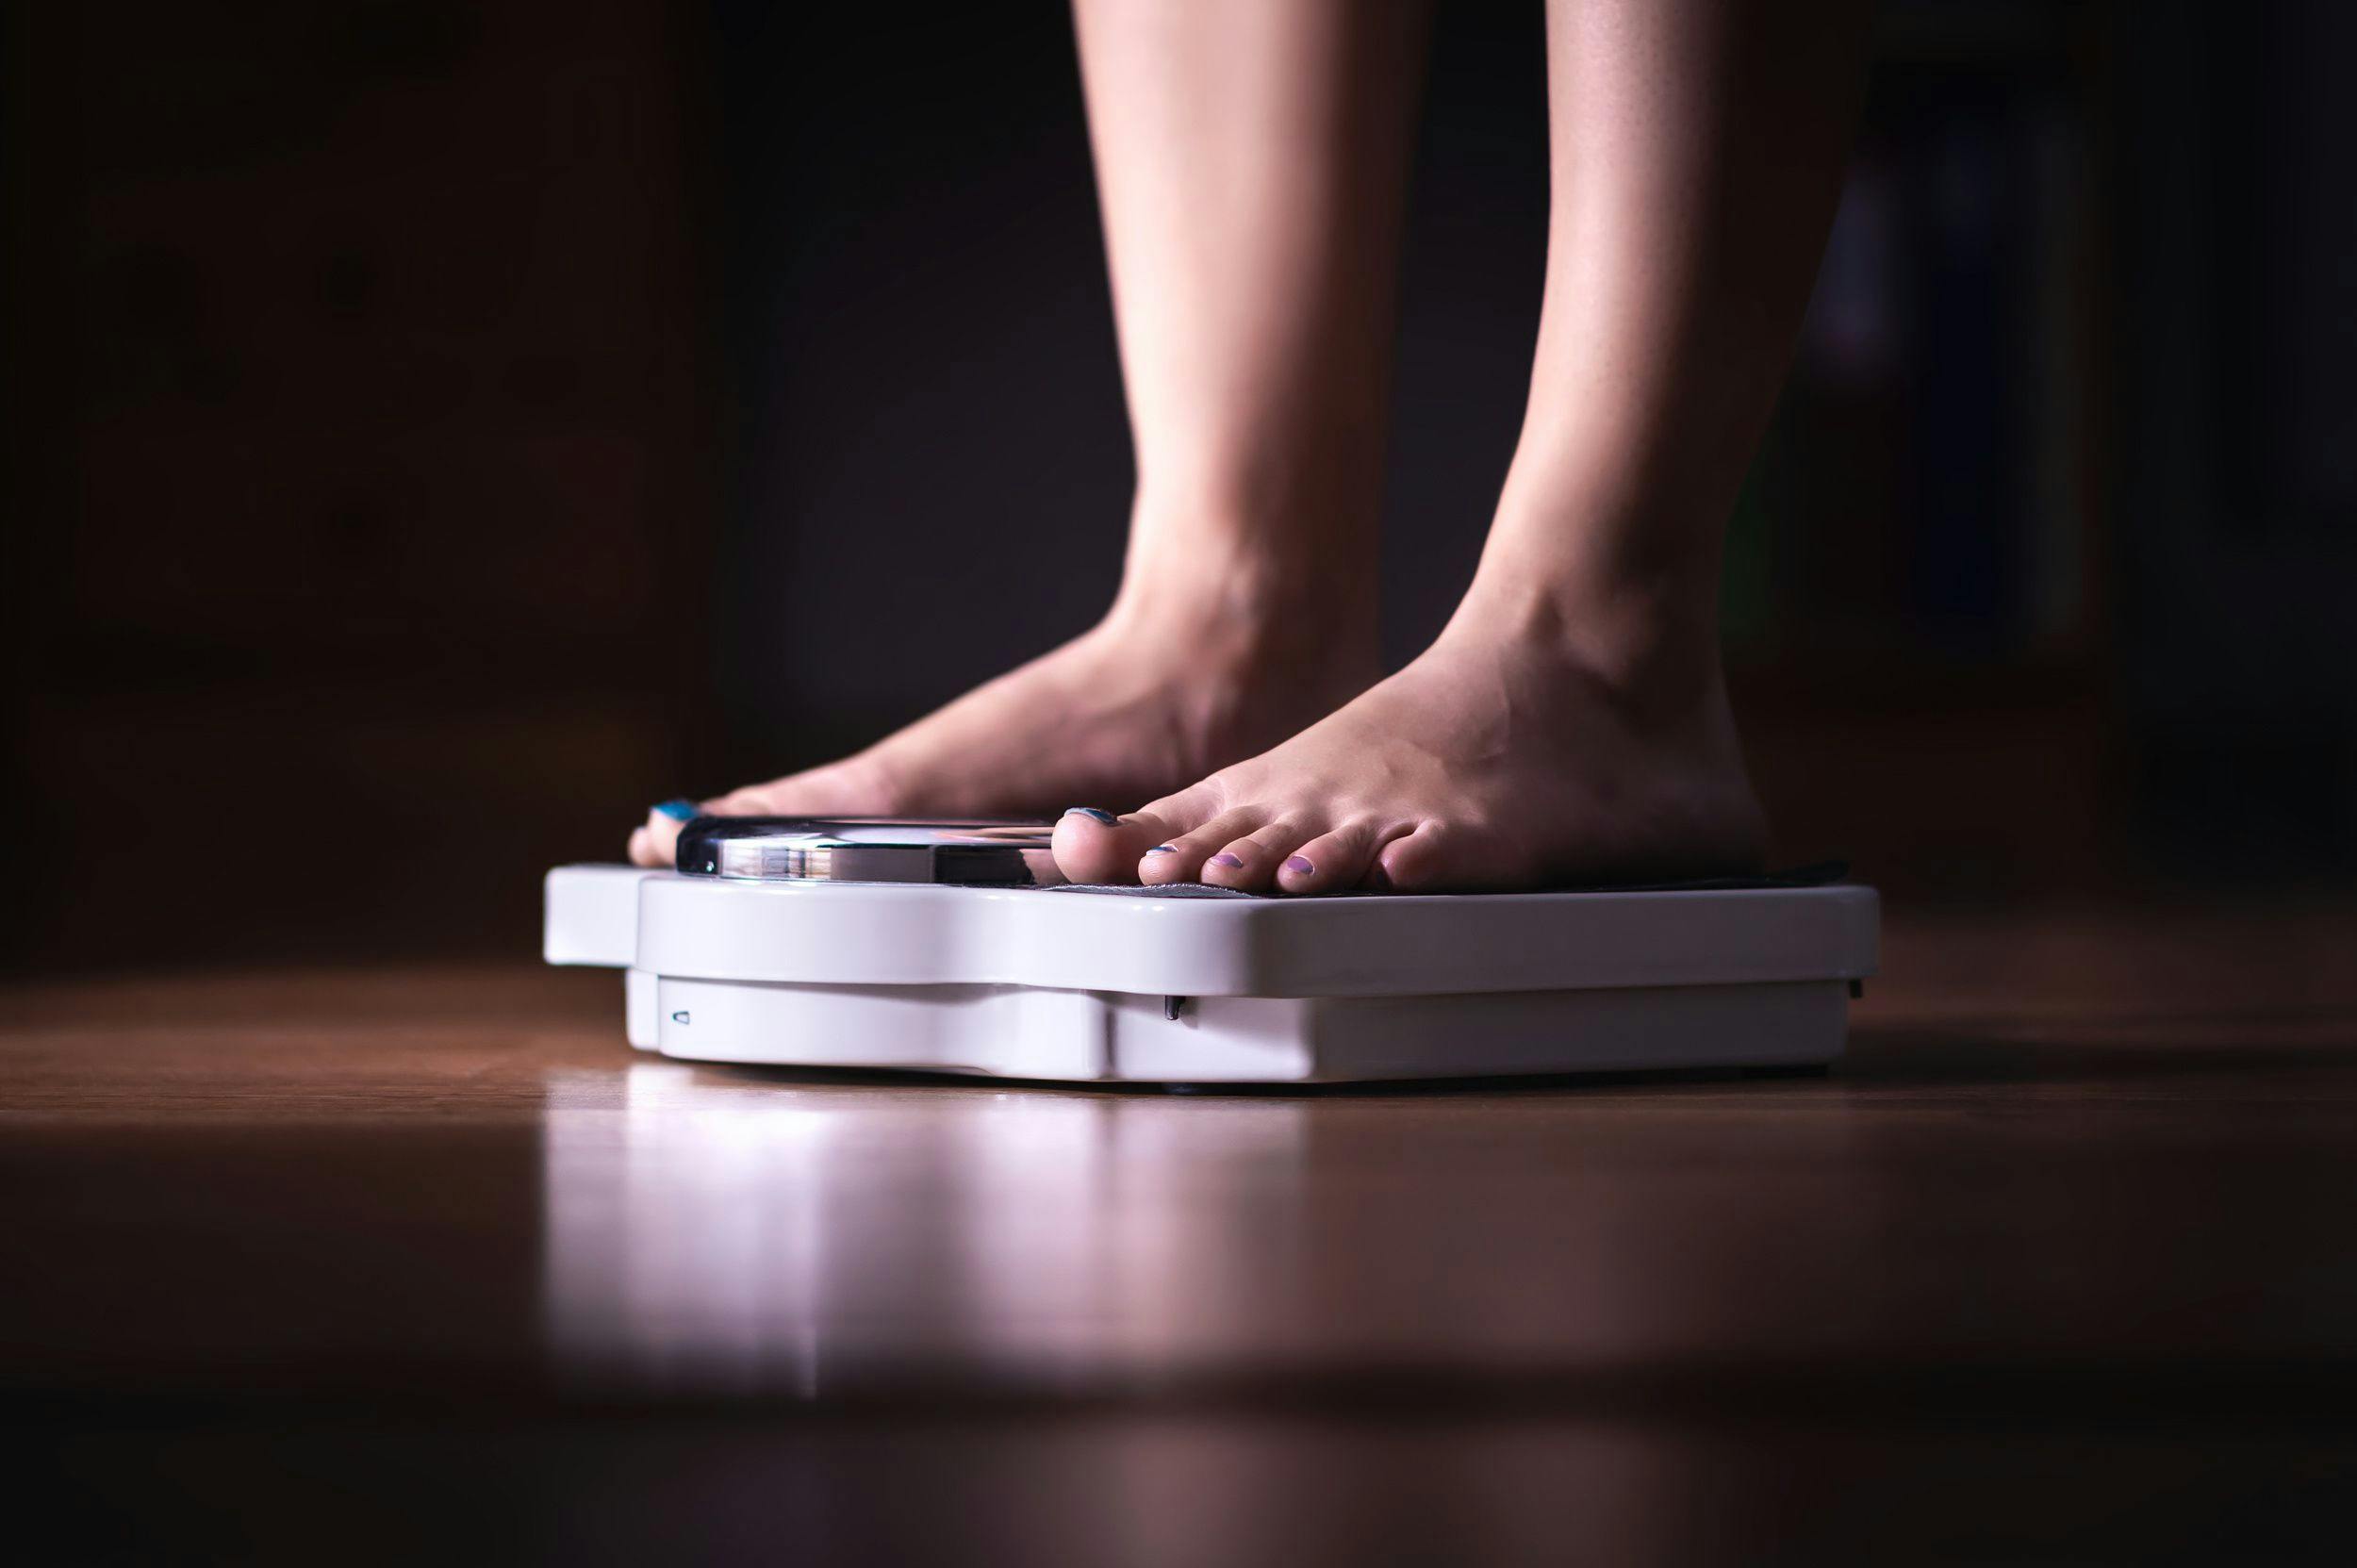 Obesity Exacts Physical and Emotional Toll During COVID-19